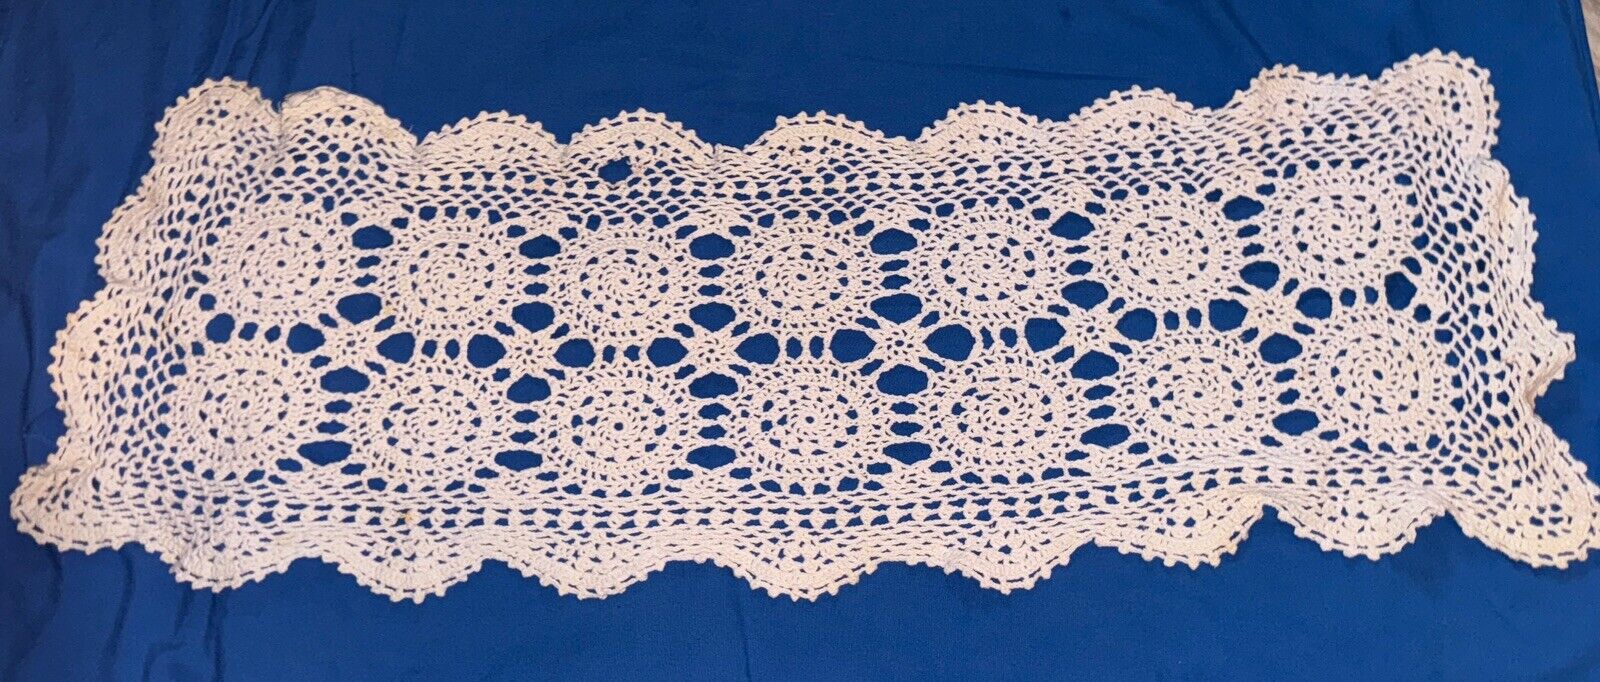 doilie doily vintage dainty 32x12 rectangle cotton in rectangle runner offwhite